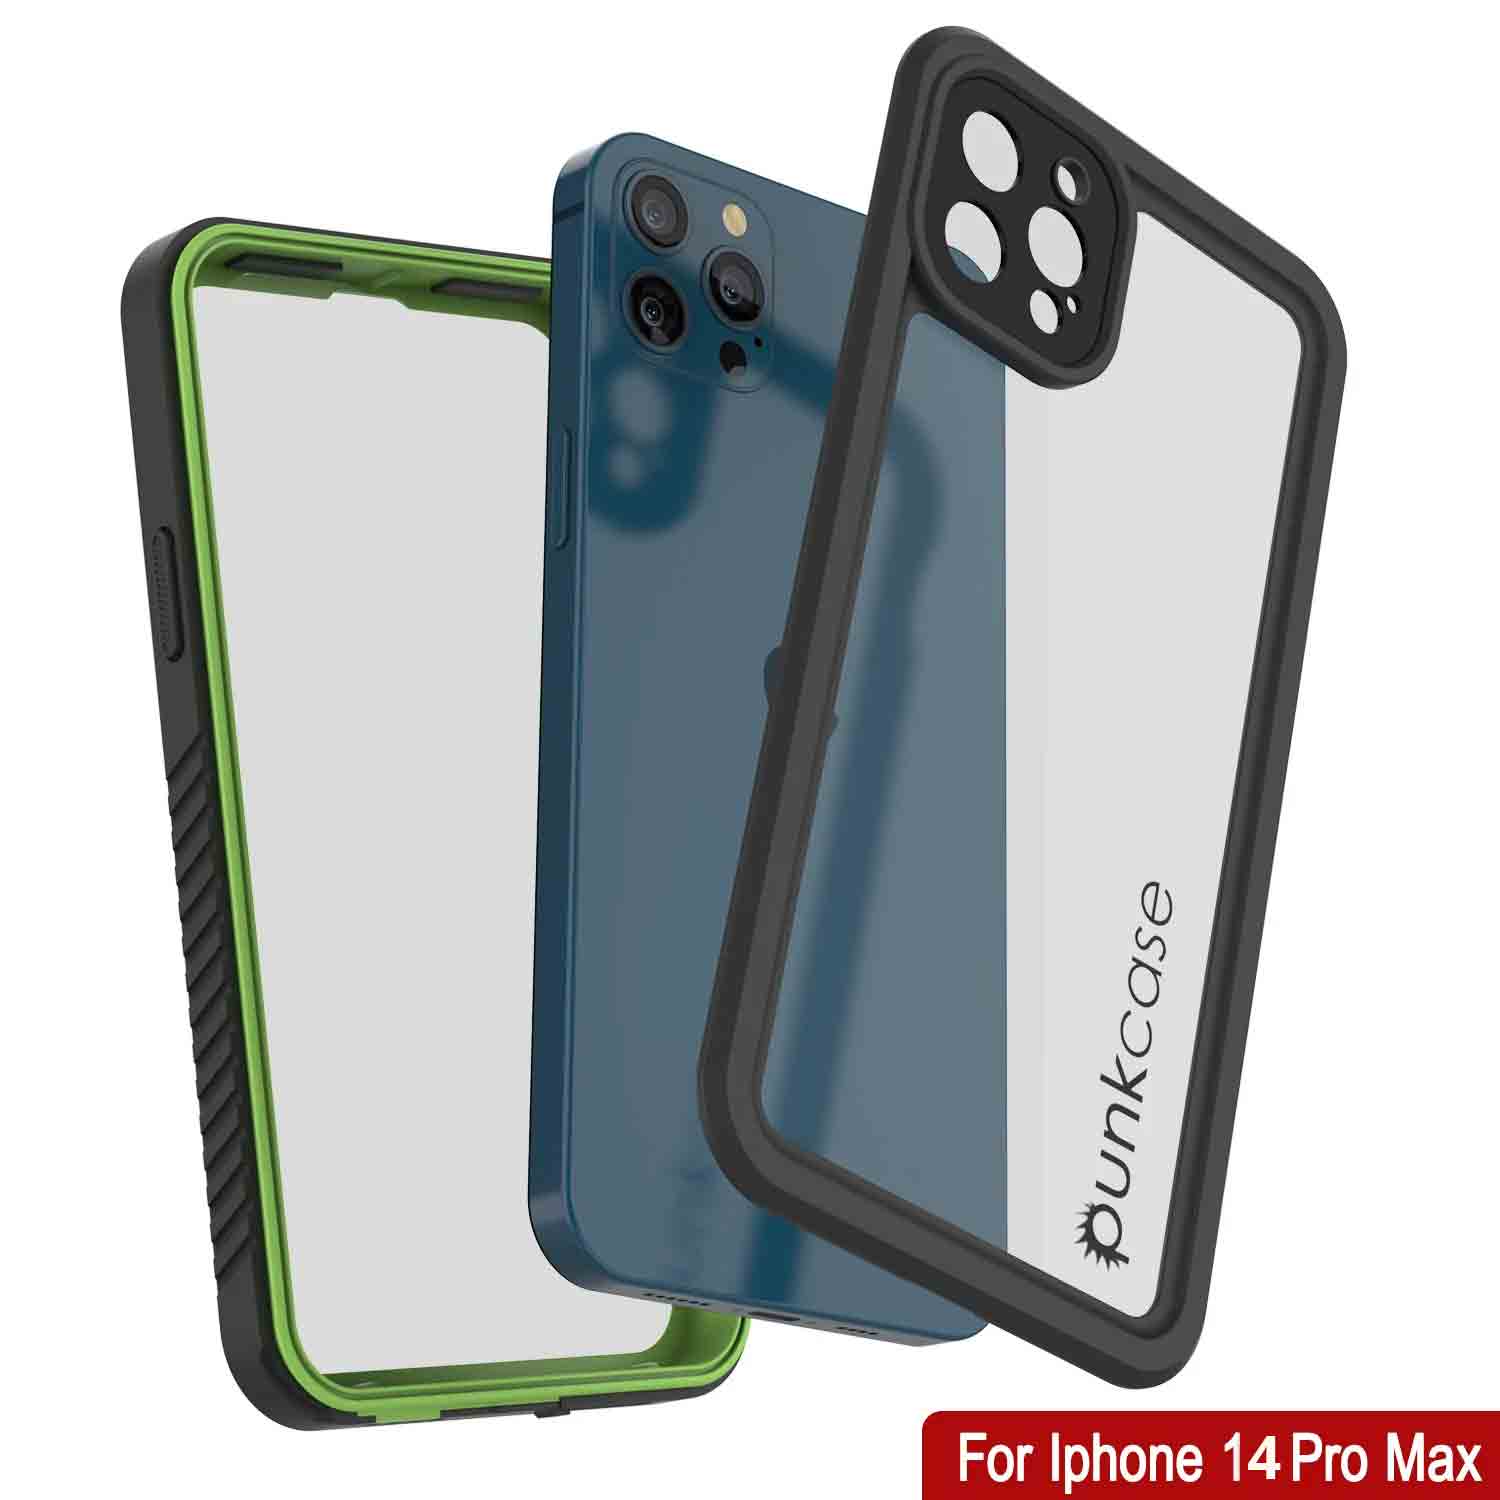 Products iPhone 14 Pro Max Waterproof Case, Punkcase [Extreme Series] Armor Cover W/ Built In Screen Protector [Light Green]